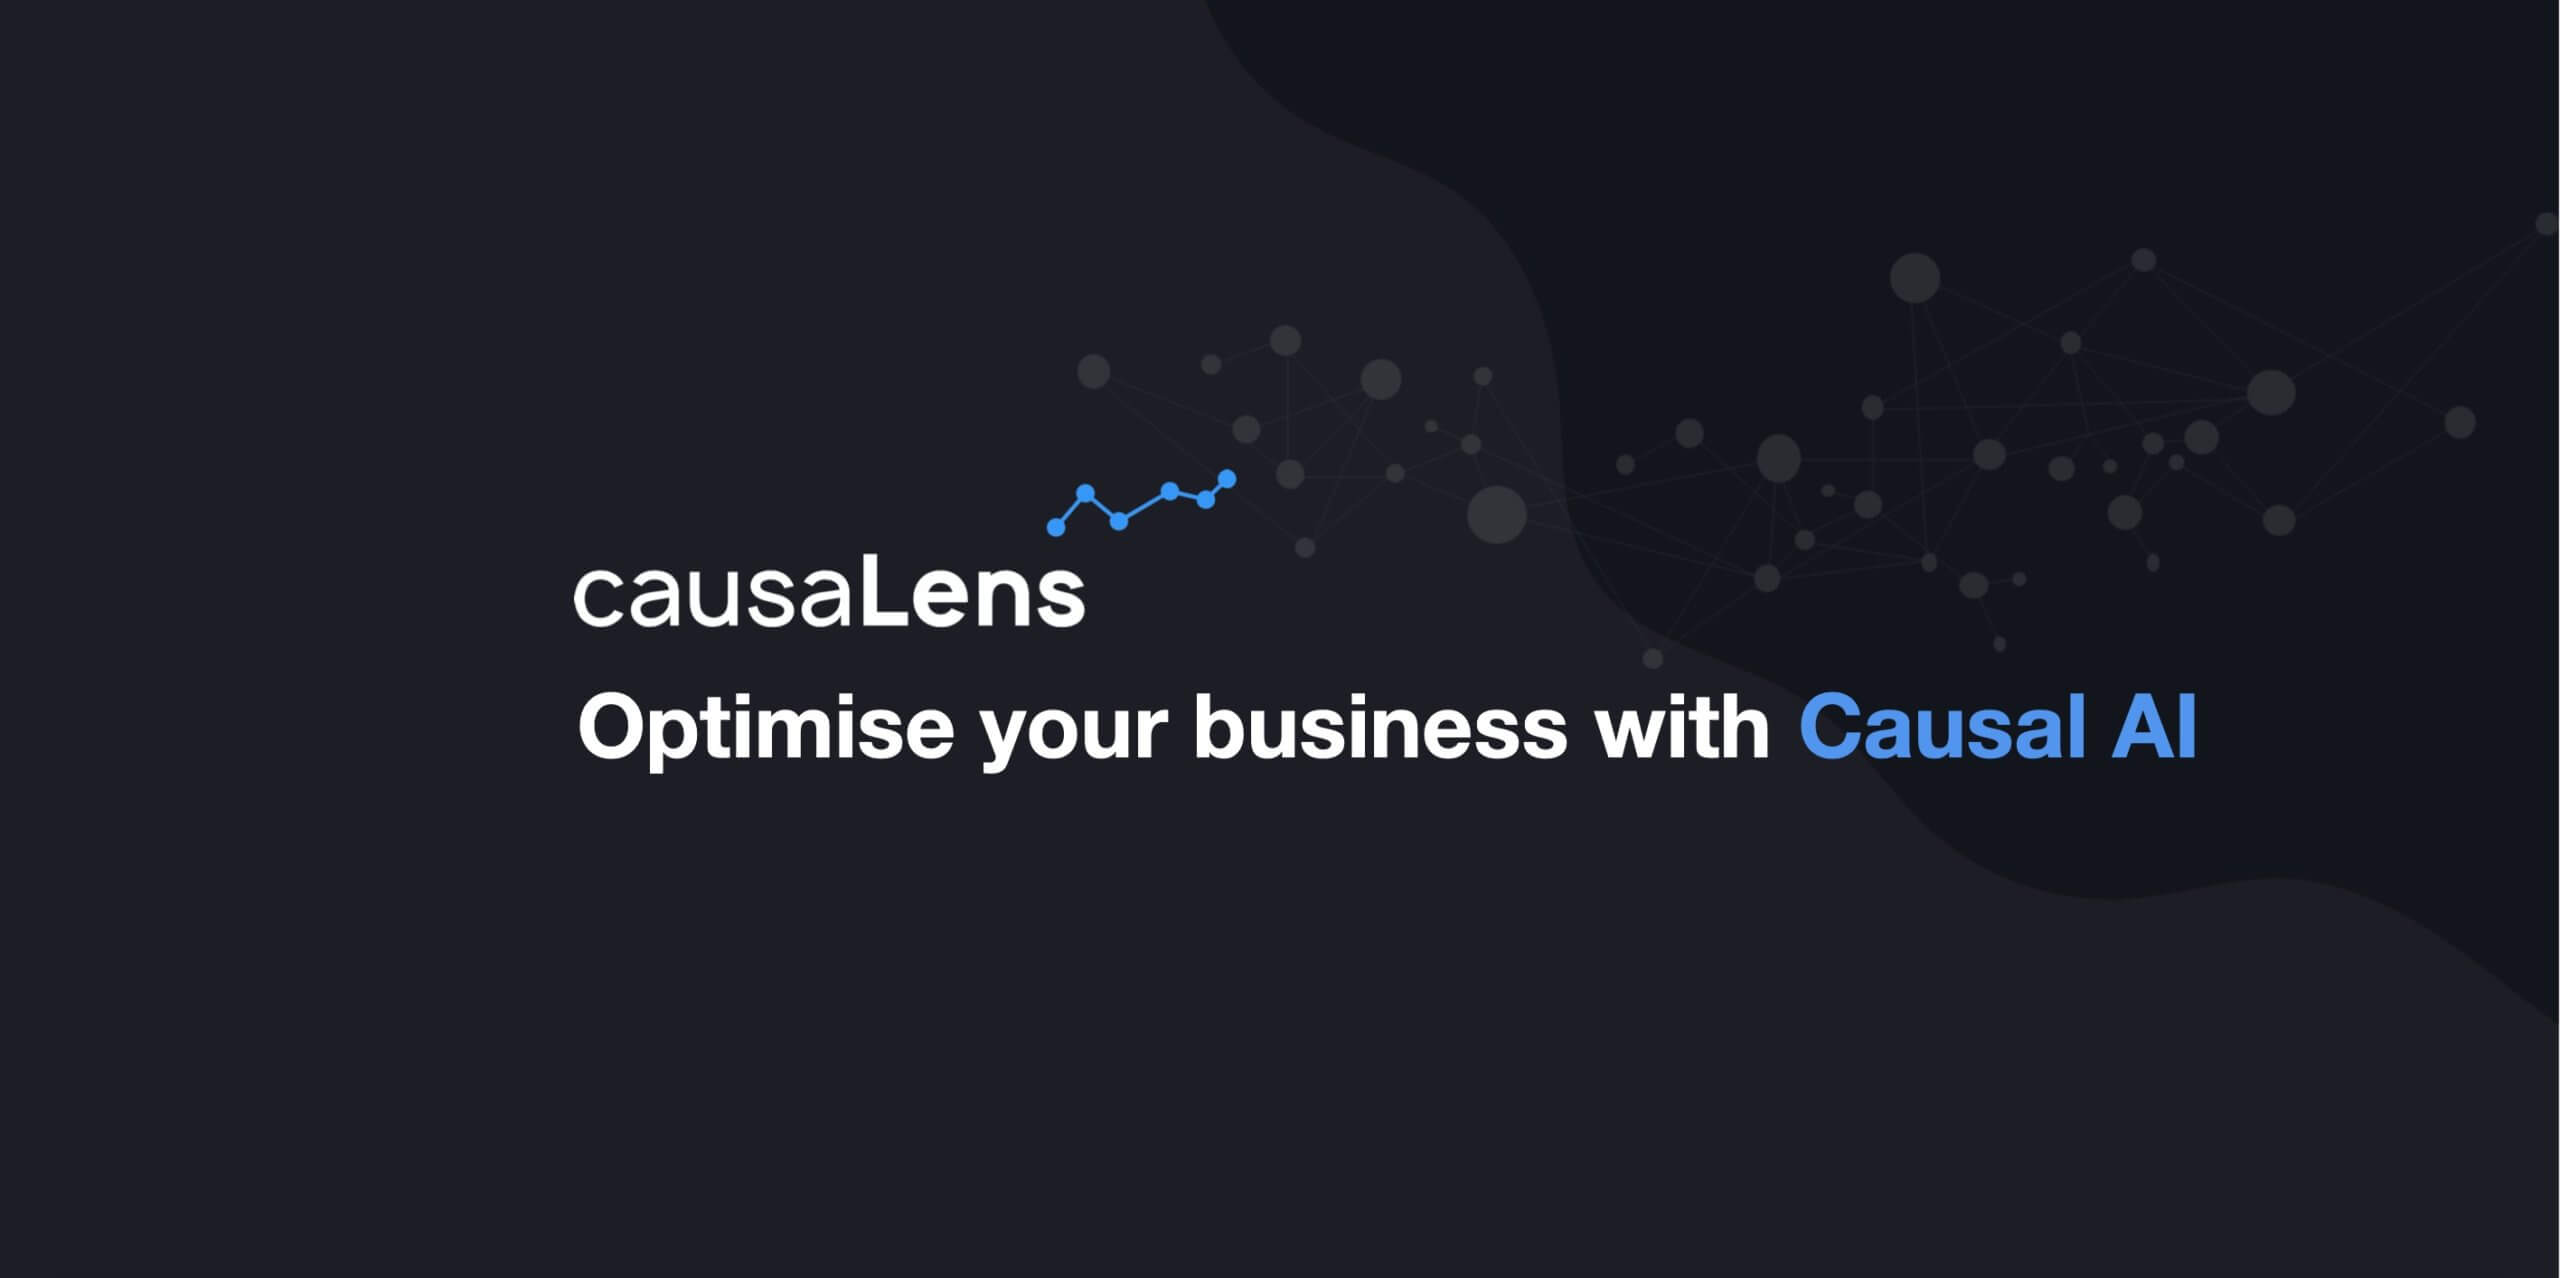 Major Financial Organisations Deploy causaLens’ Pioneering Causal AI Platform to Discover Key Causal Insights and Generate More Profitable Trading Strategies